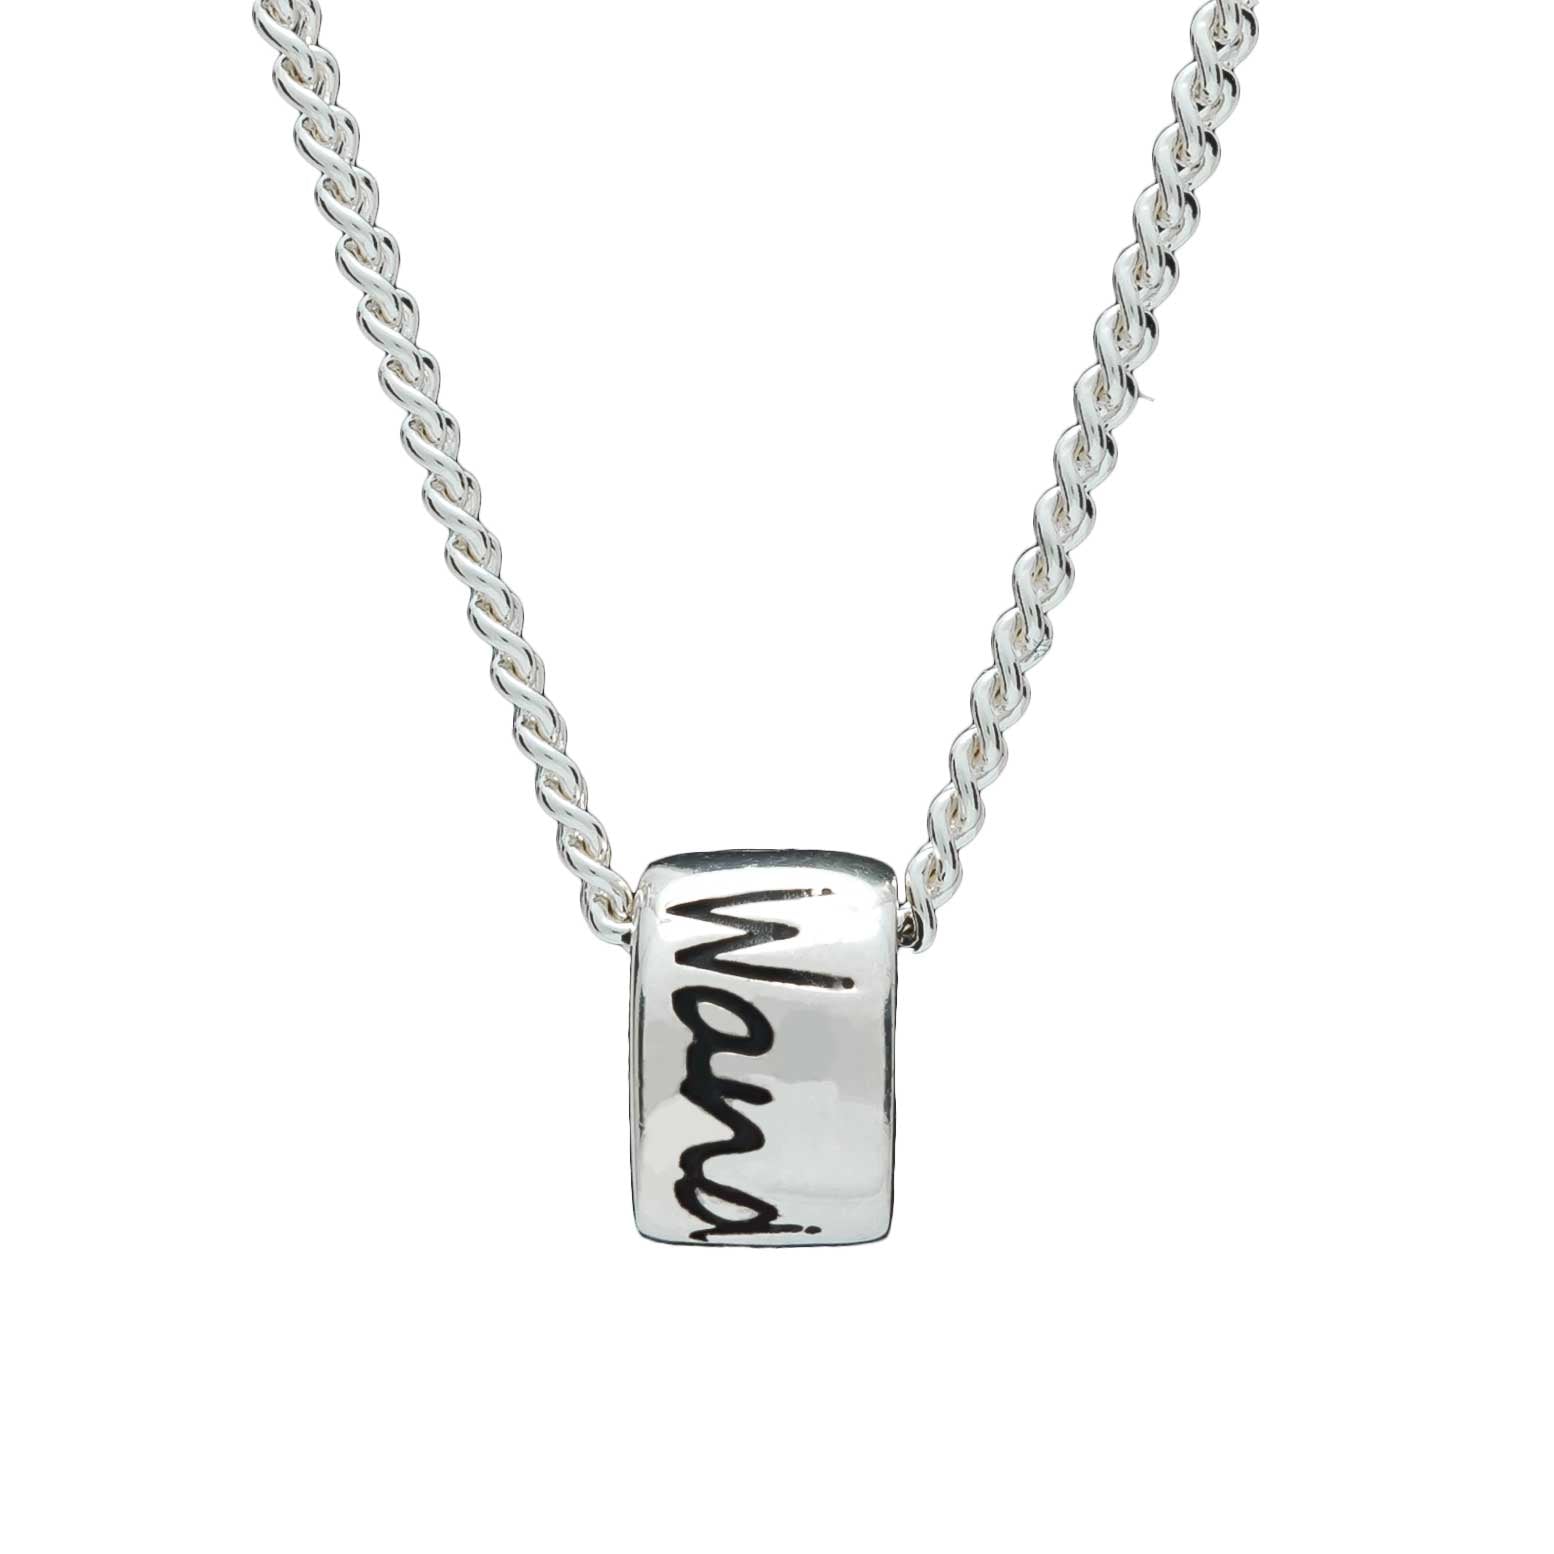 Wanderlust silver necklace for men & women - gap year travel gift alternative to a silver St Christopher